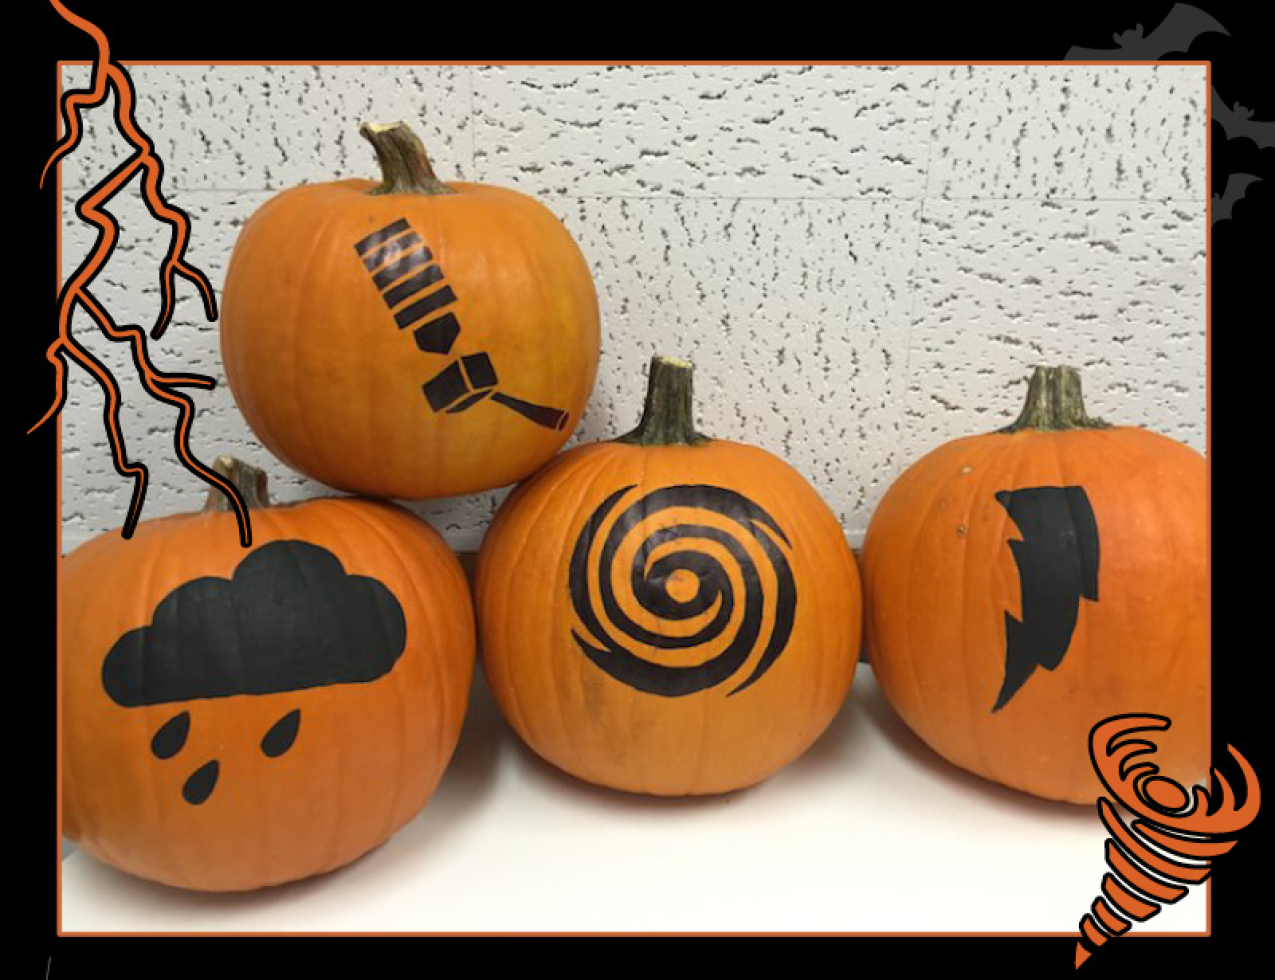 Four pumpkins with black painted graphics on them of a rain cloud, a spiral, a lightning bolt, and a satellite. Border of the photo is black with orange atmospheric graphics of a lightning bolt and a tornado. Text: Paint your own pumpkins, #NOAASpookyScience with NOAA logo.